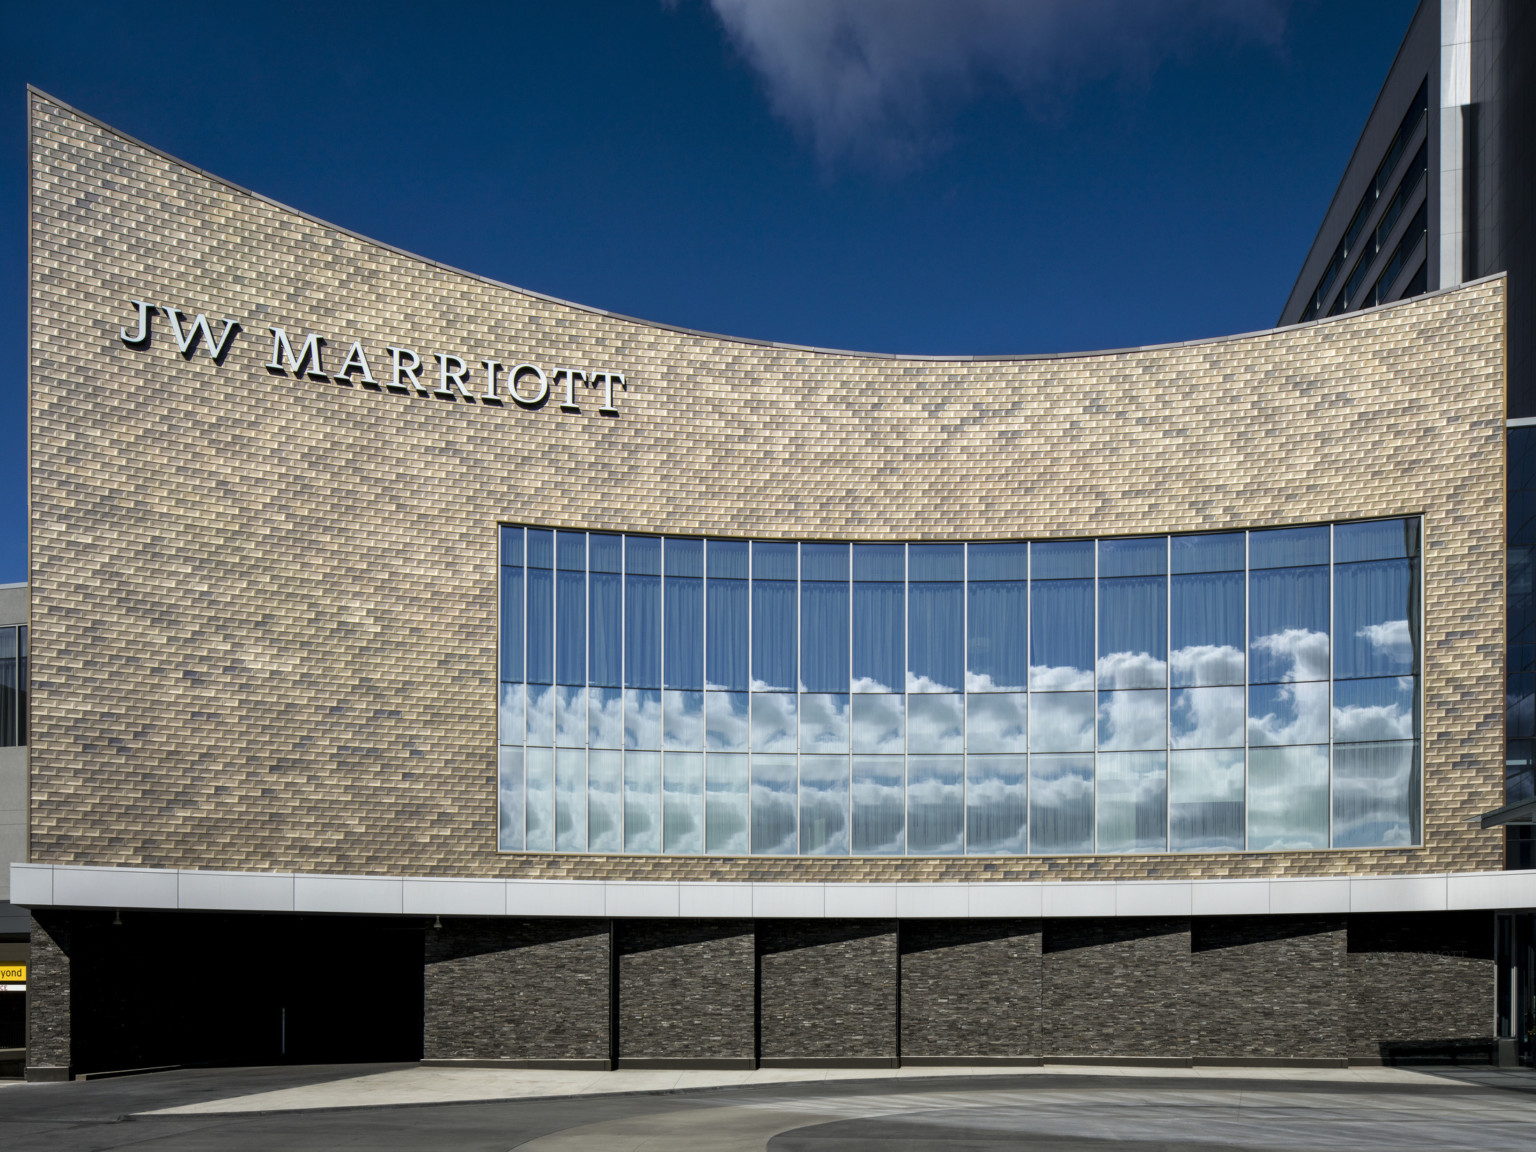 Closeup of curved brick lower building with JW Marriott sign and panel of double height windows above garage entrance